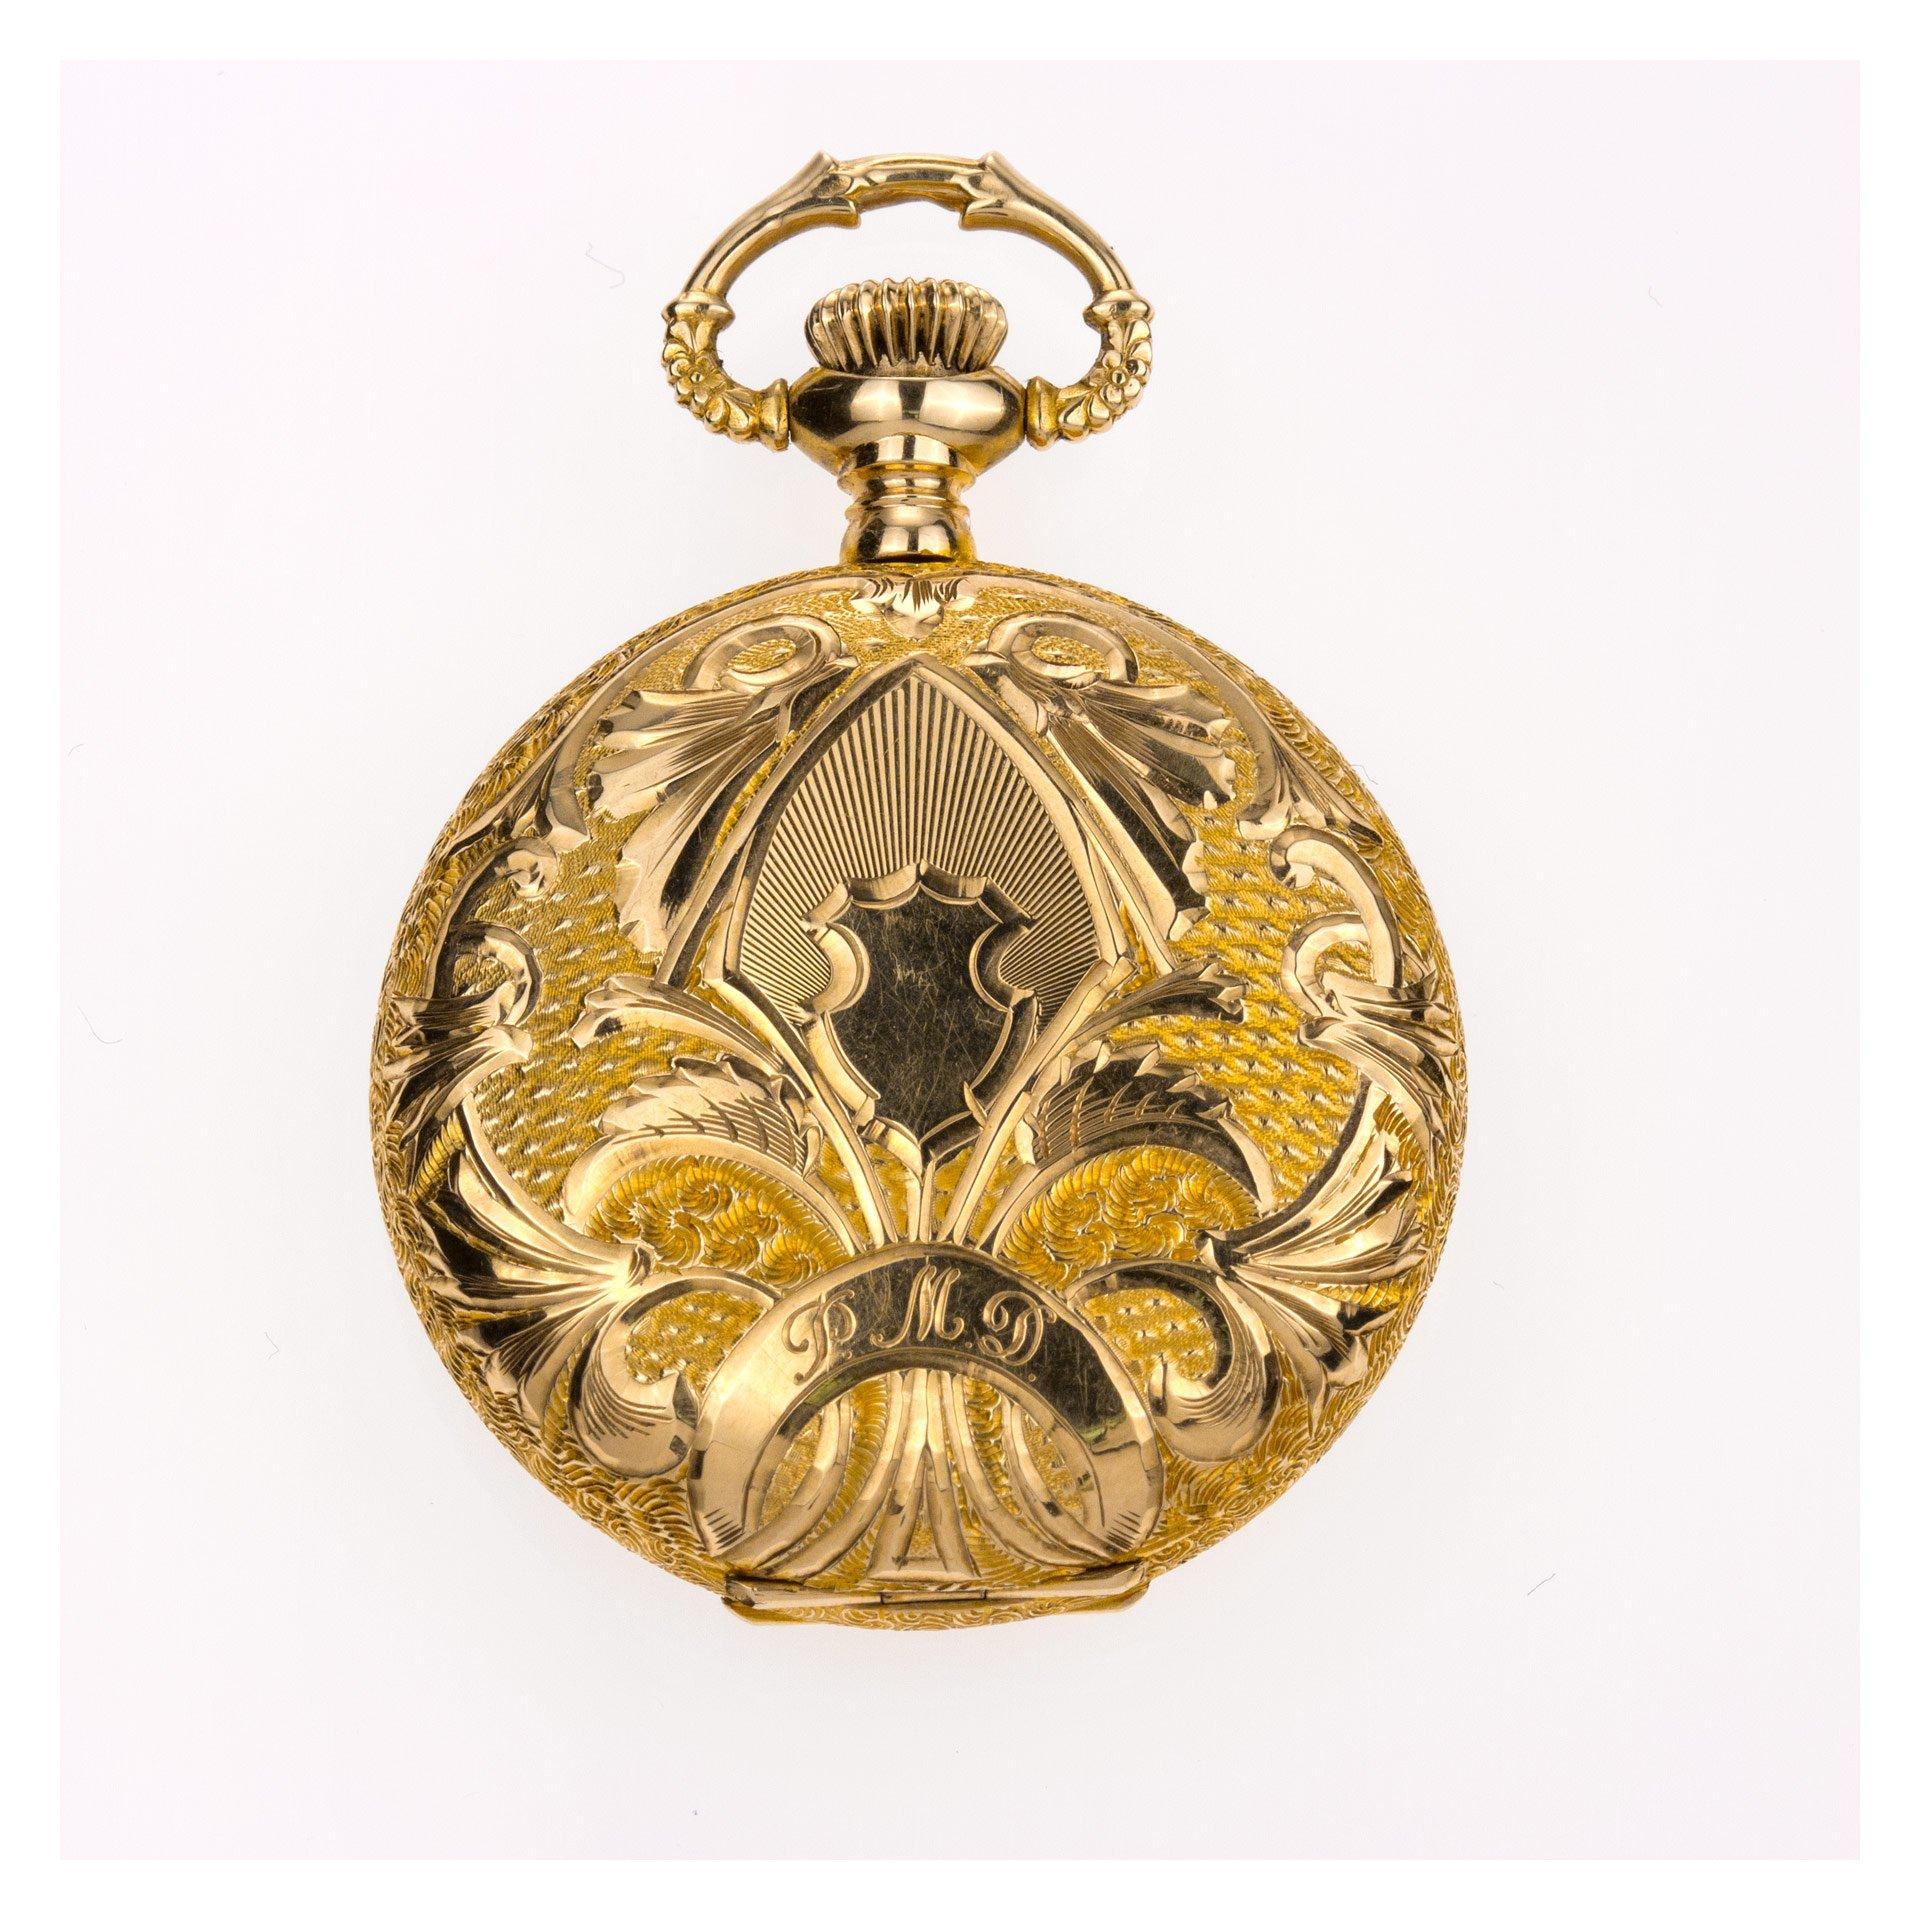 American Waltham Royal hunter case pocket watch, 7 jewels, porcelain dial and spade hands in 14k yellow gold pocket watch. 30mm. Manual w/ subseconds. Circa 1900s. Fine Pre-owned Waltham Watch.

Certified preowned Vintage Waltham pocket watch